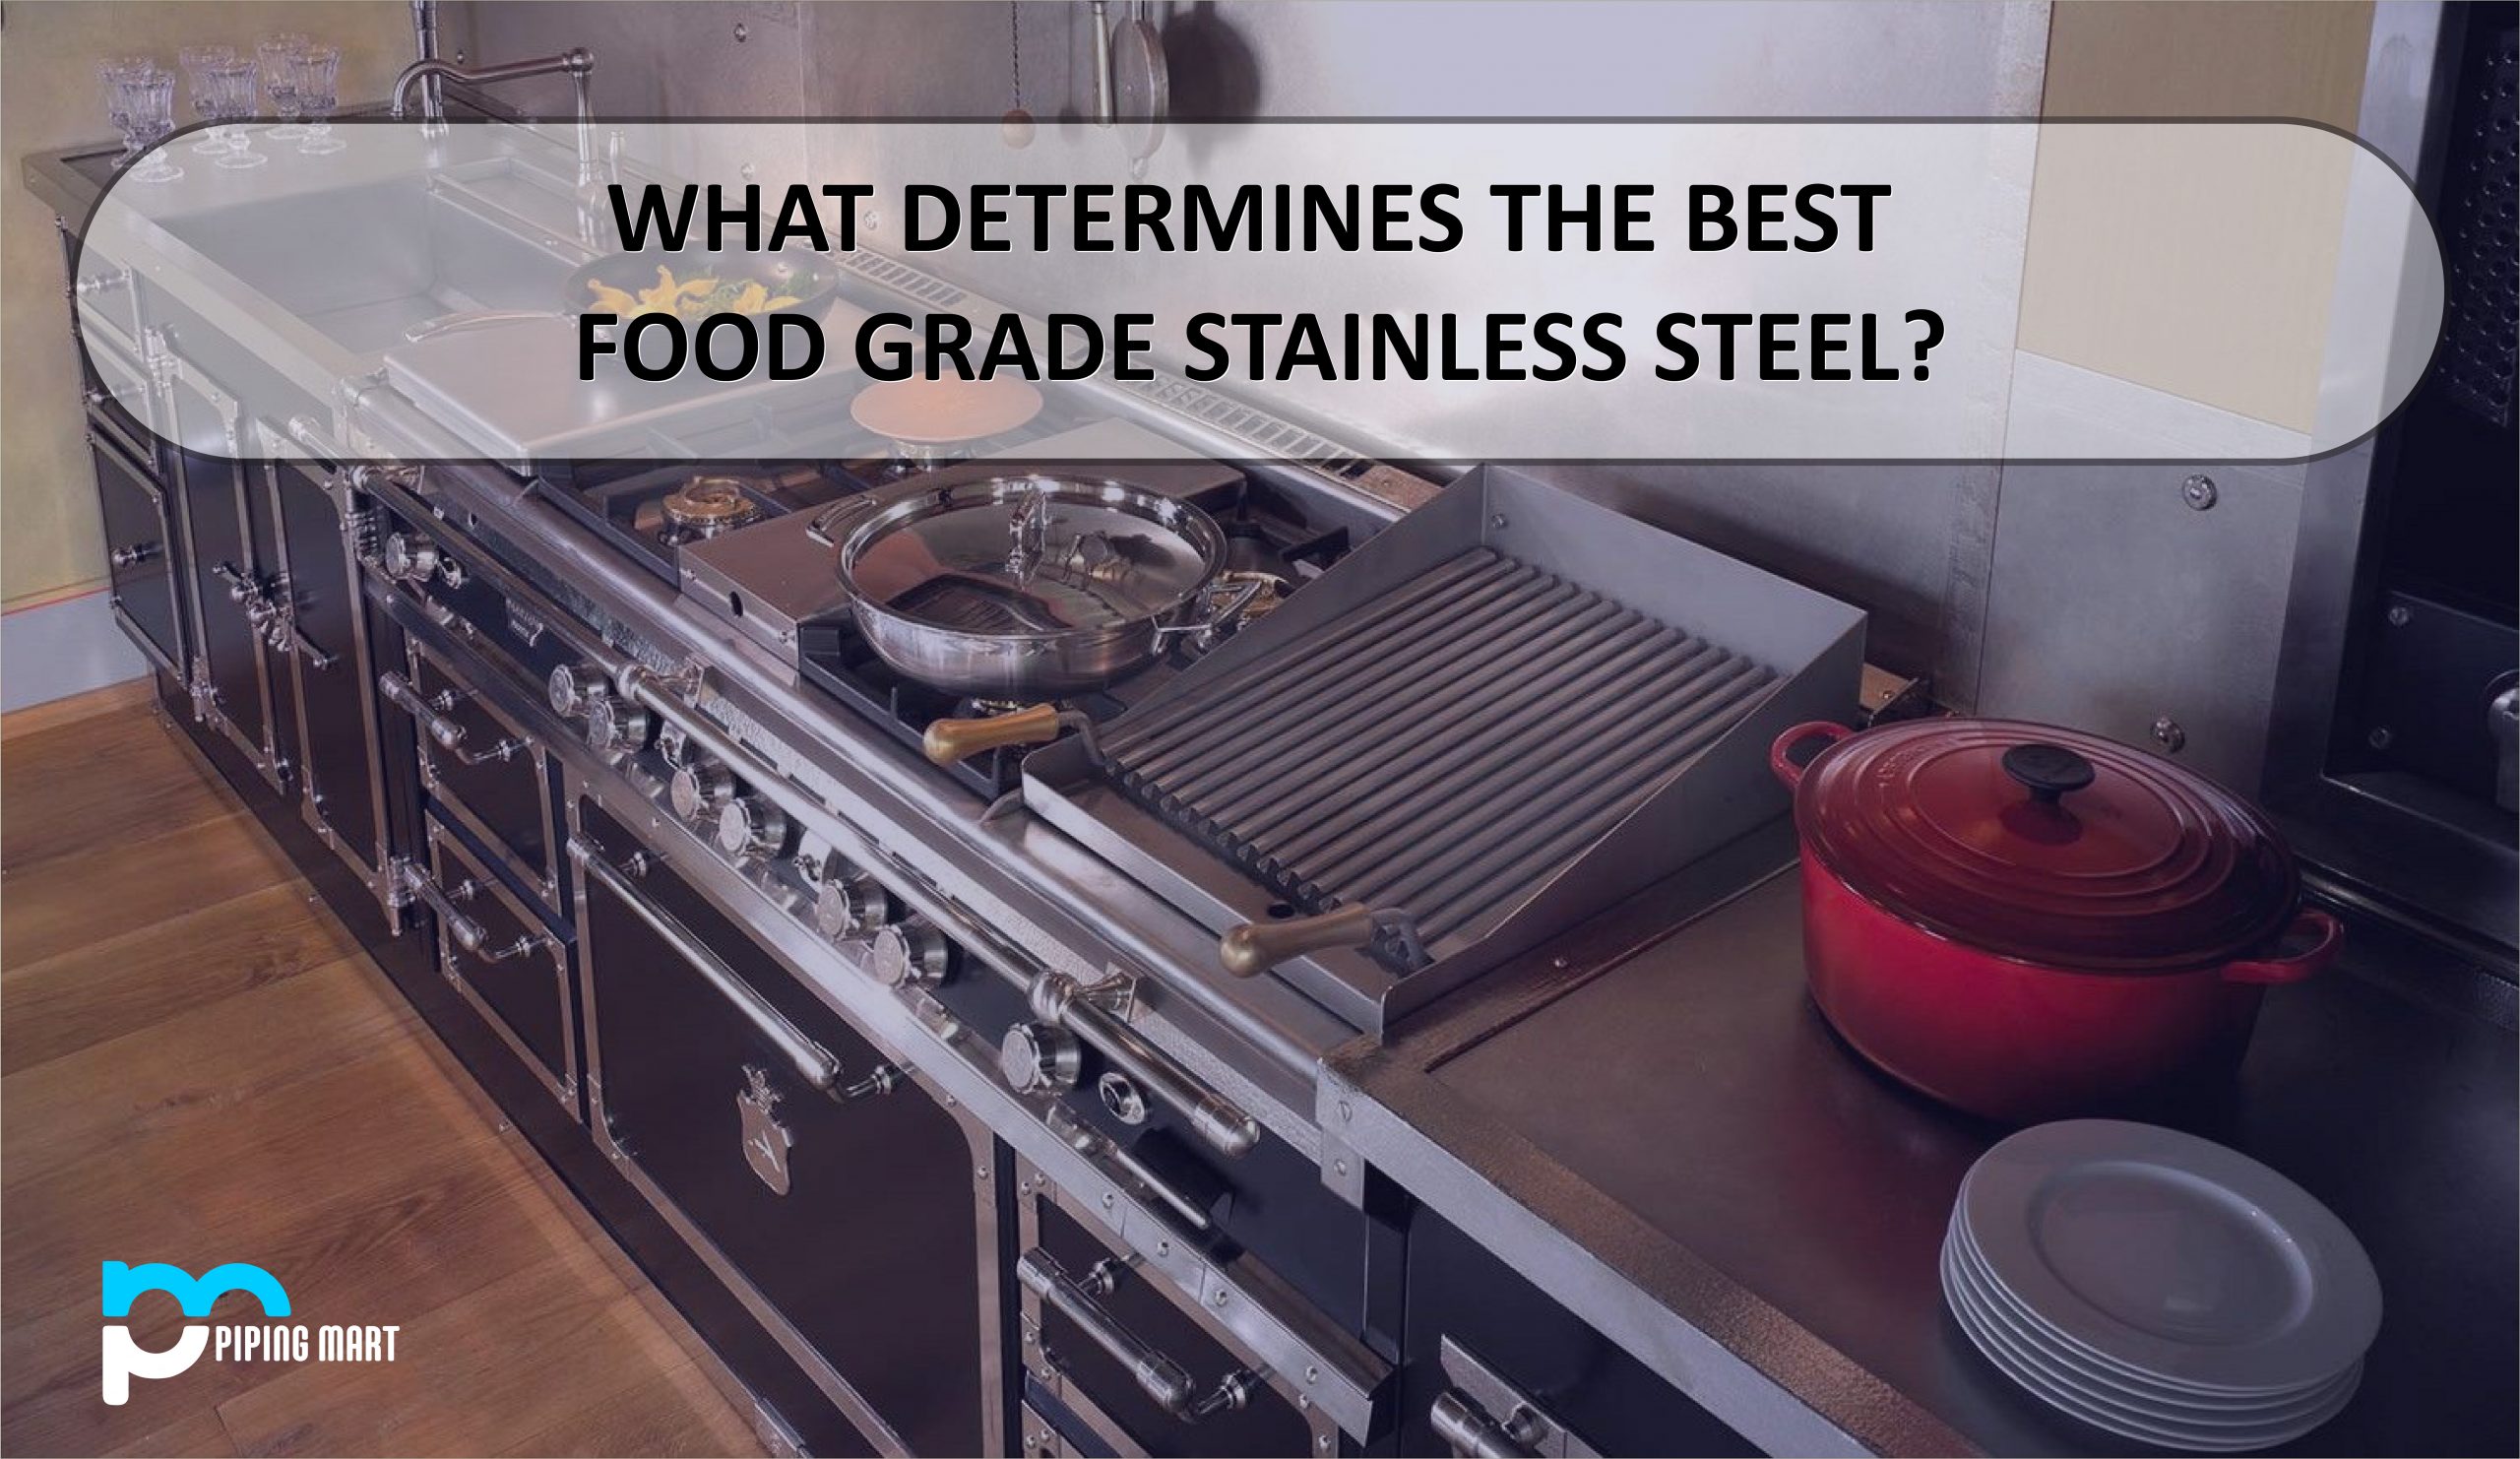 What is the Best Food Grade Stainless Steel?